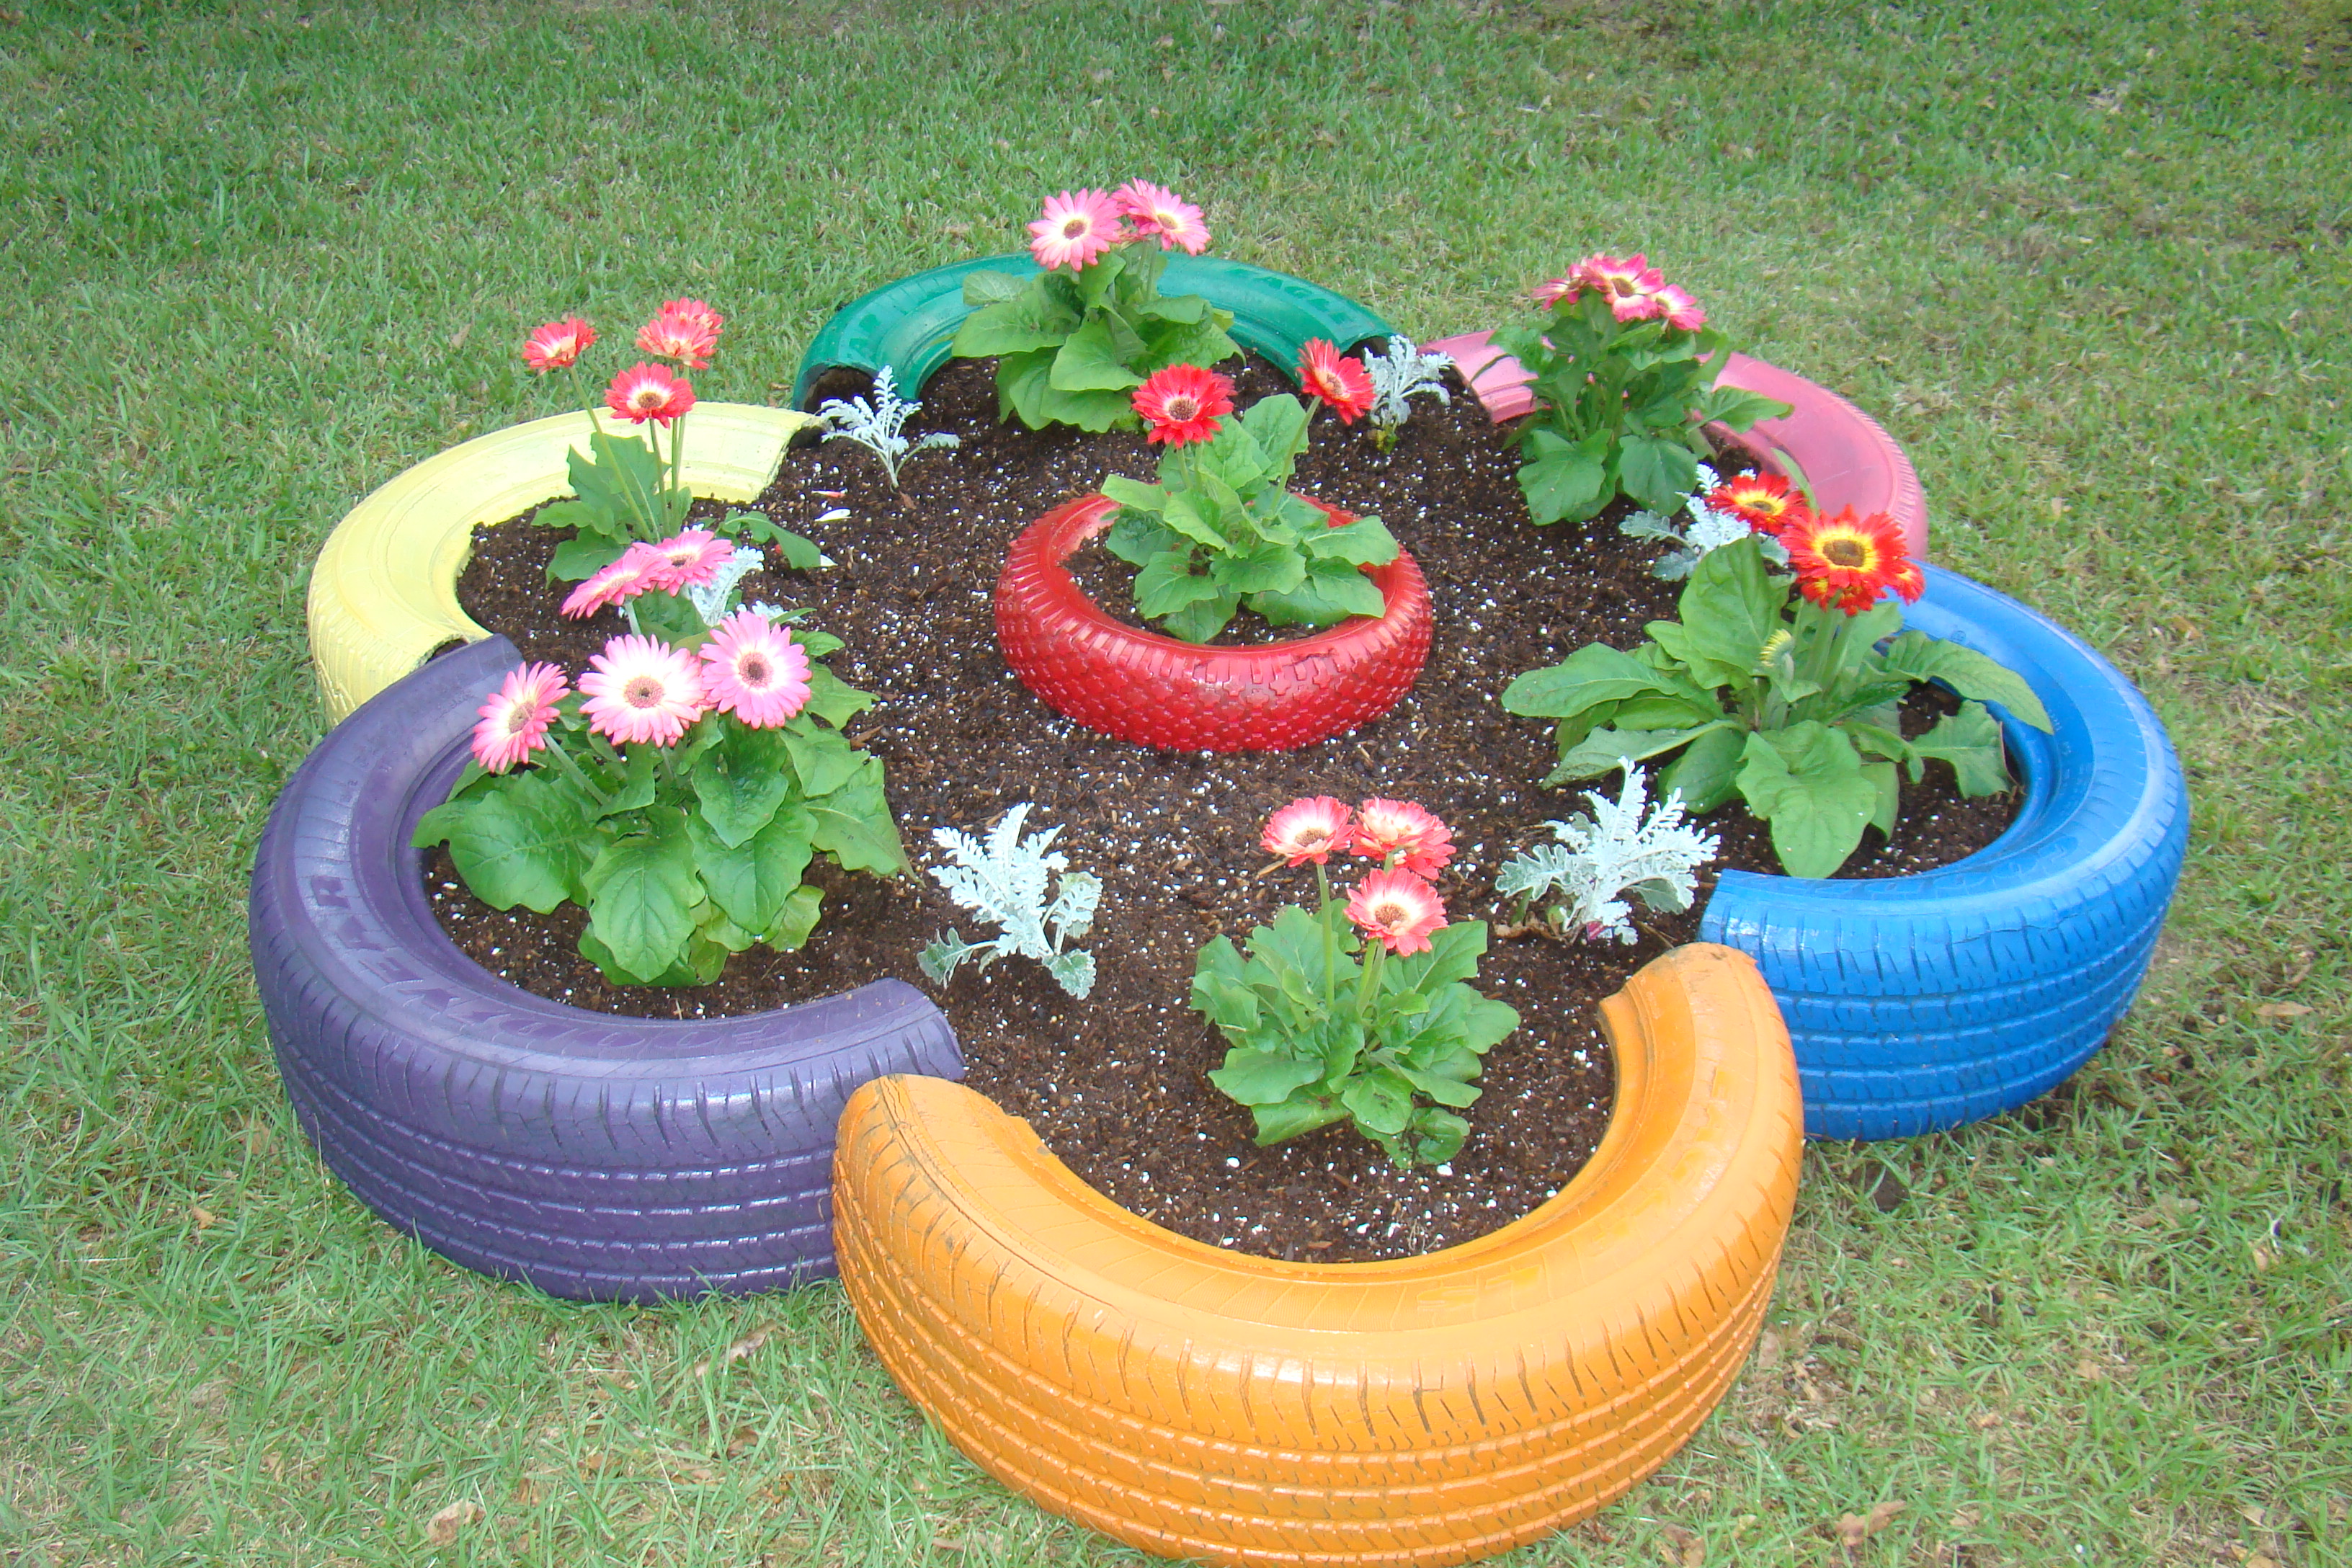 Painted Tires Decorating I Love Pinterest Painted Tires Garden